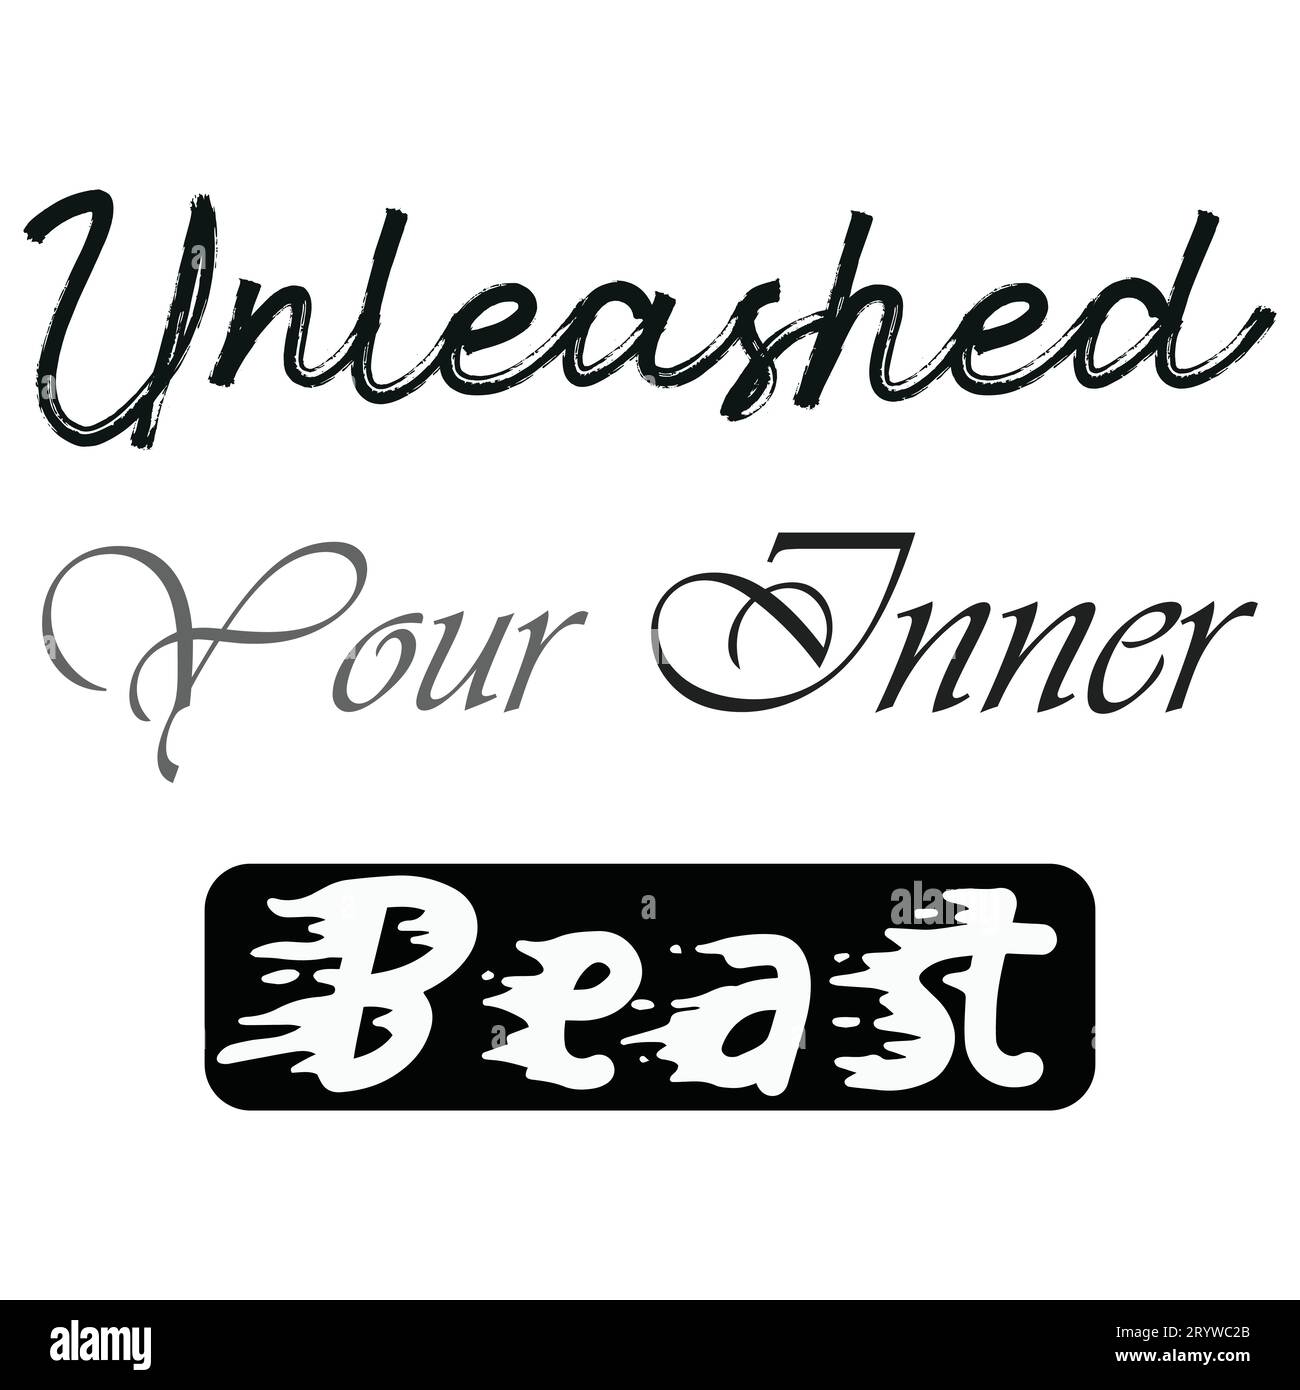 Unleashed your inner beast a motivational Stock Vector